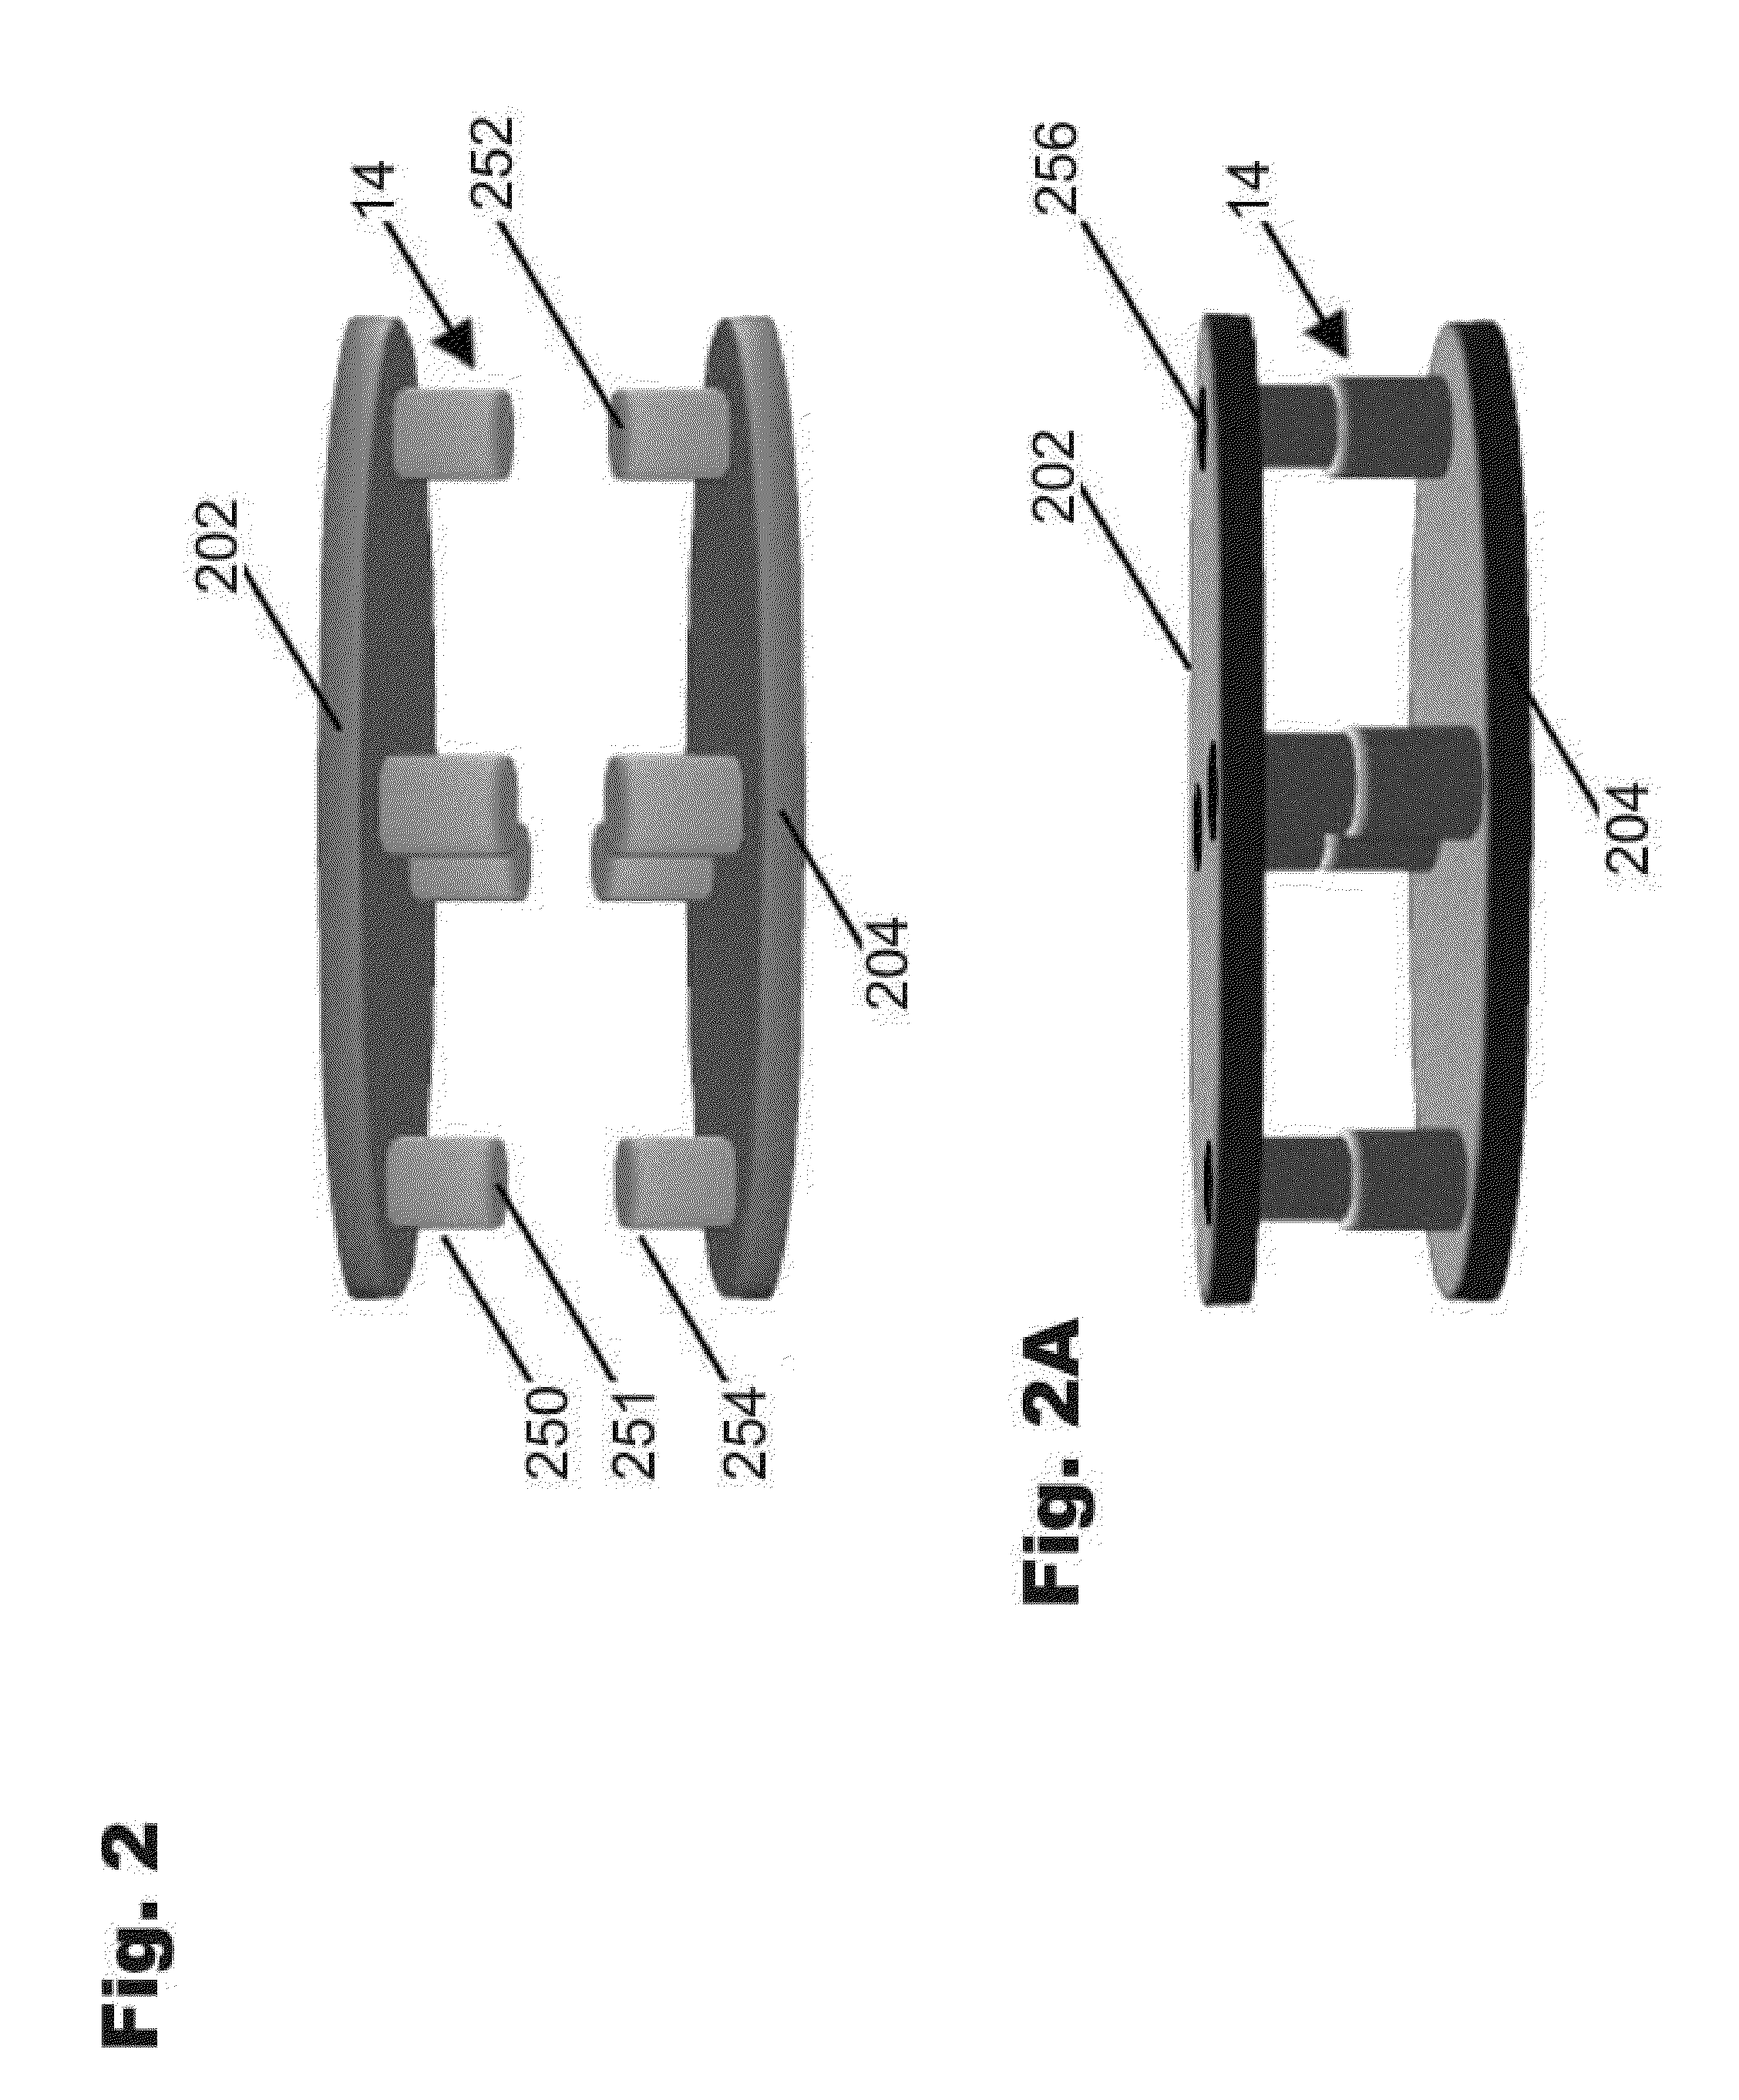 Automatic Apparatus for High Speed Precision Portioning of Granules By Weight